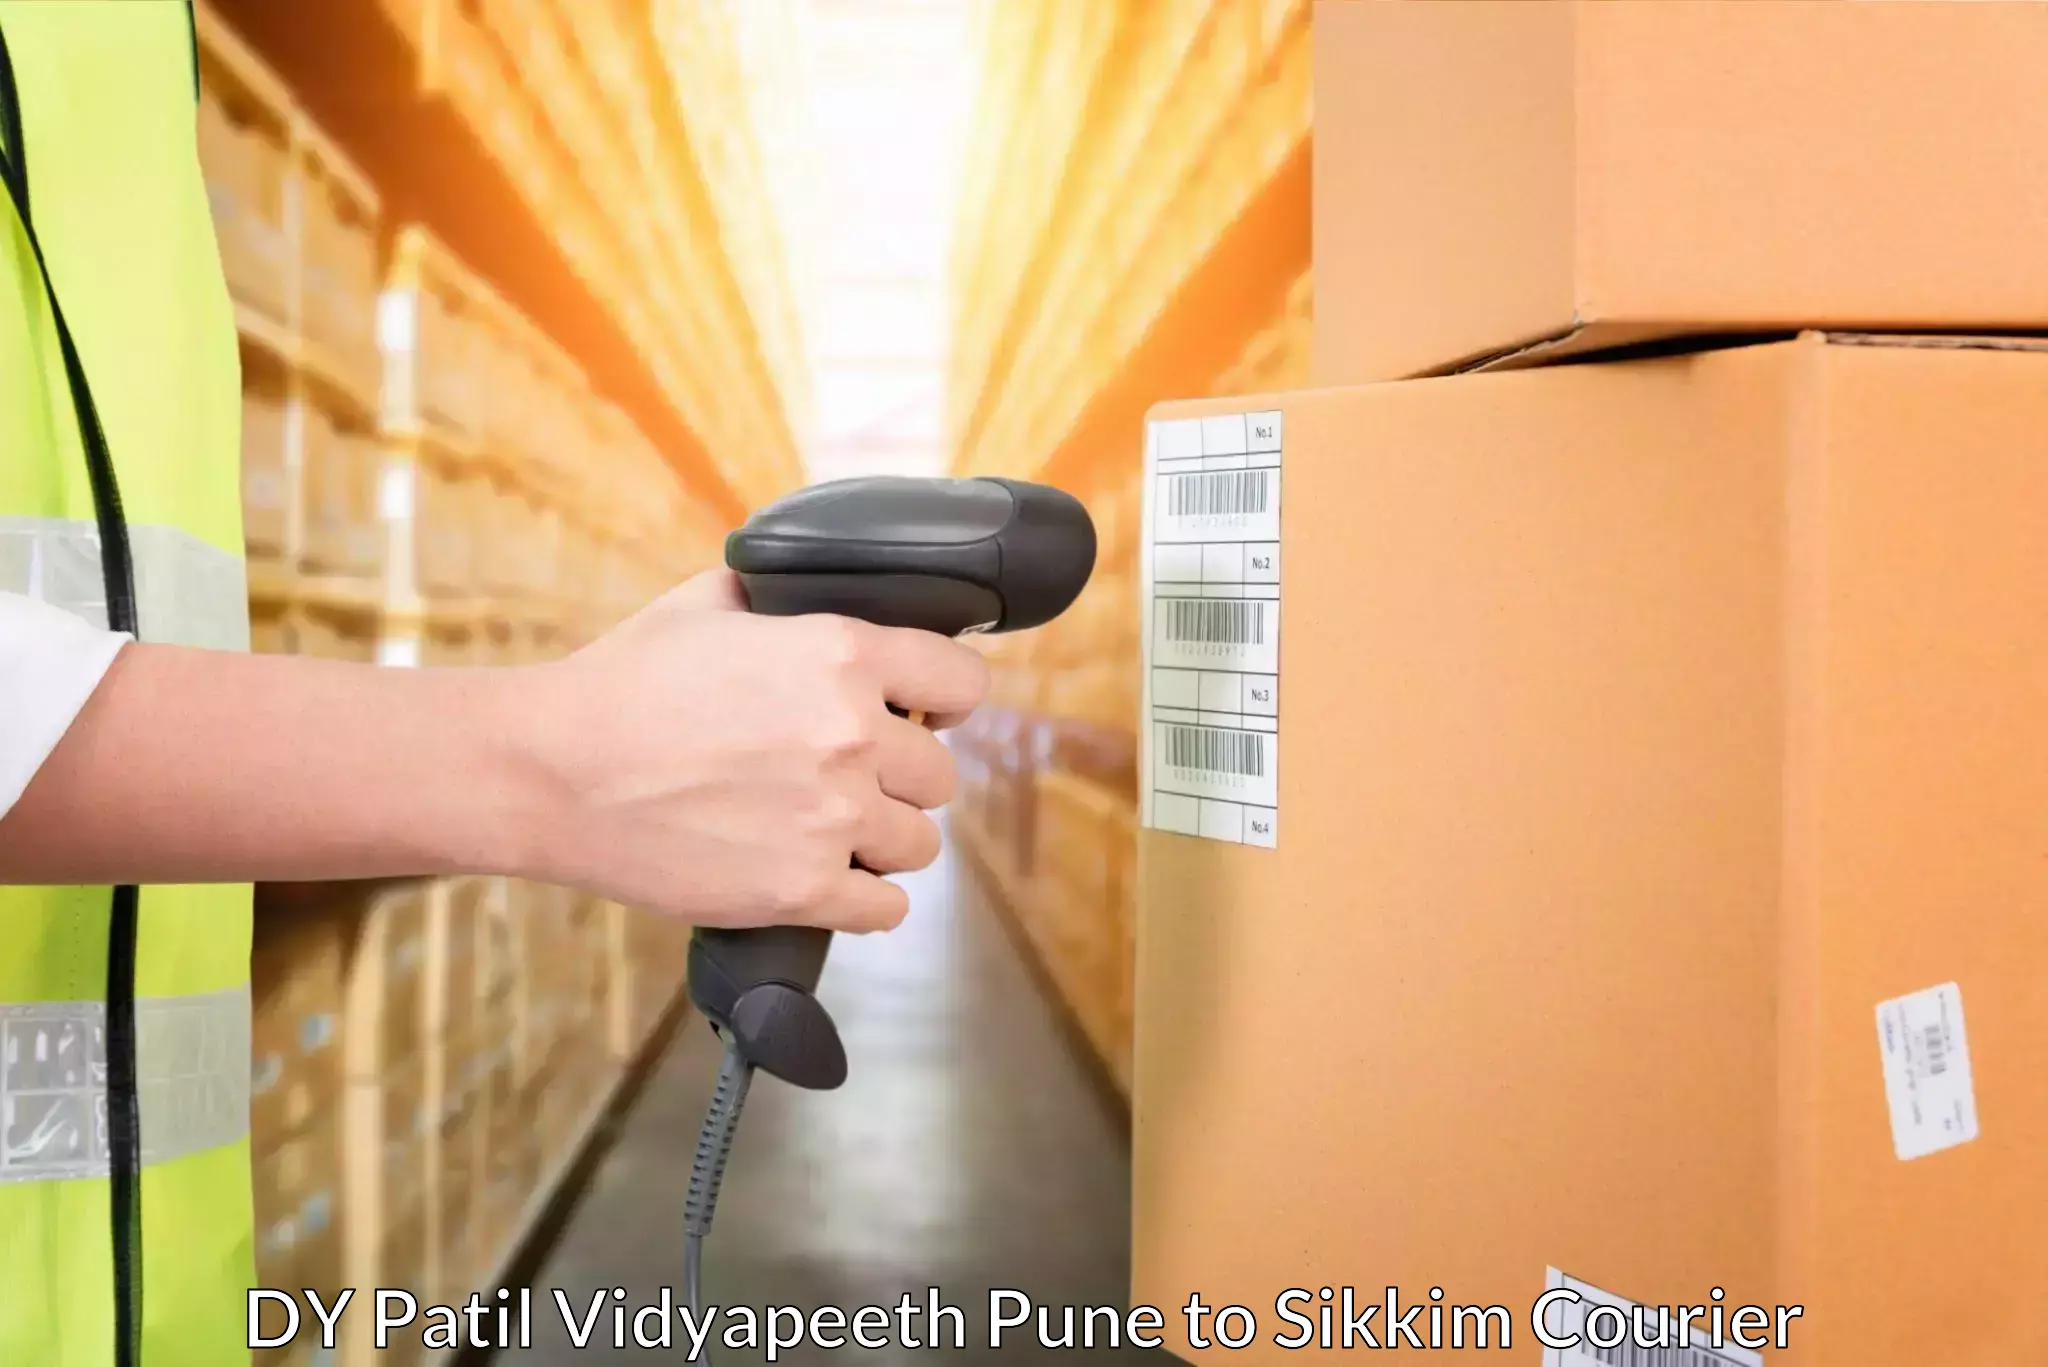 Track and trace shipping DY Patil Vidyapeeth Pune to Geyzing